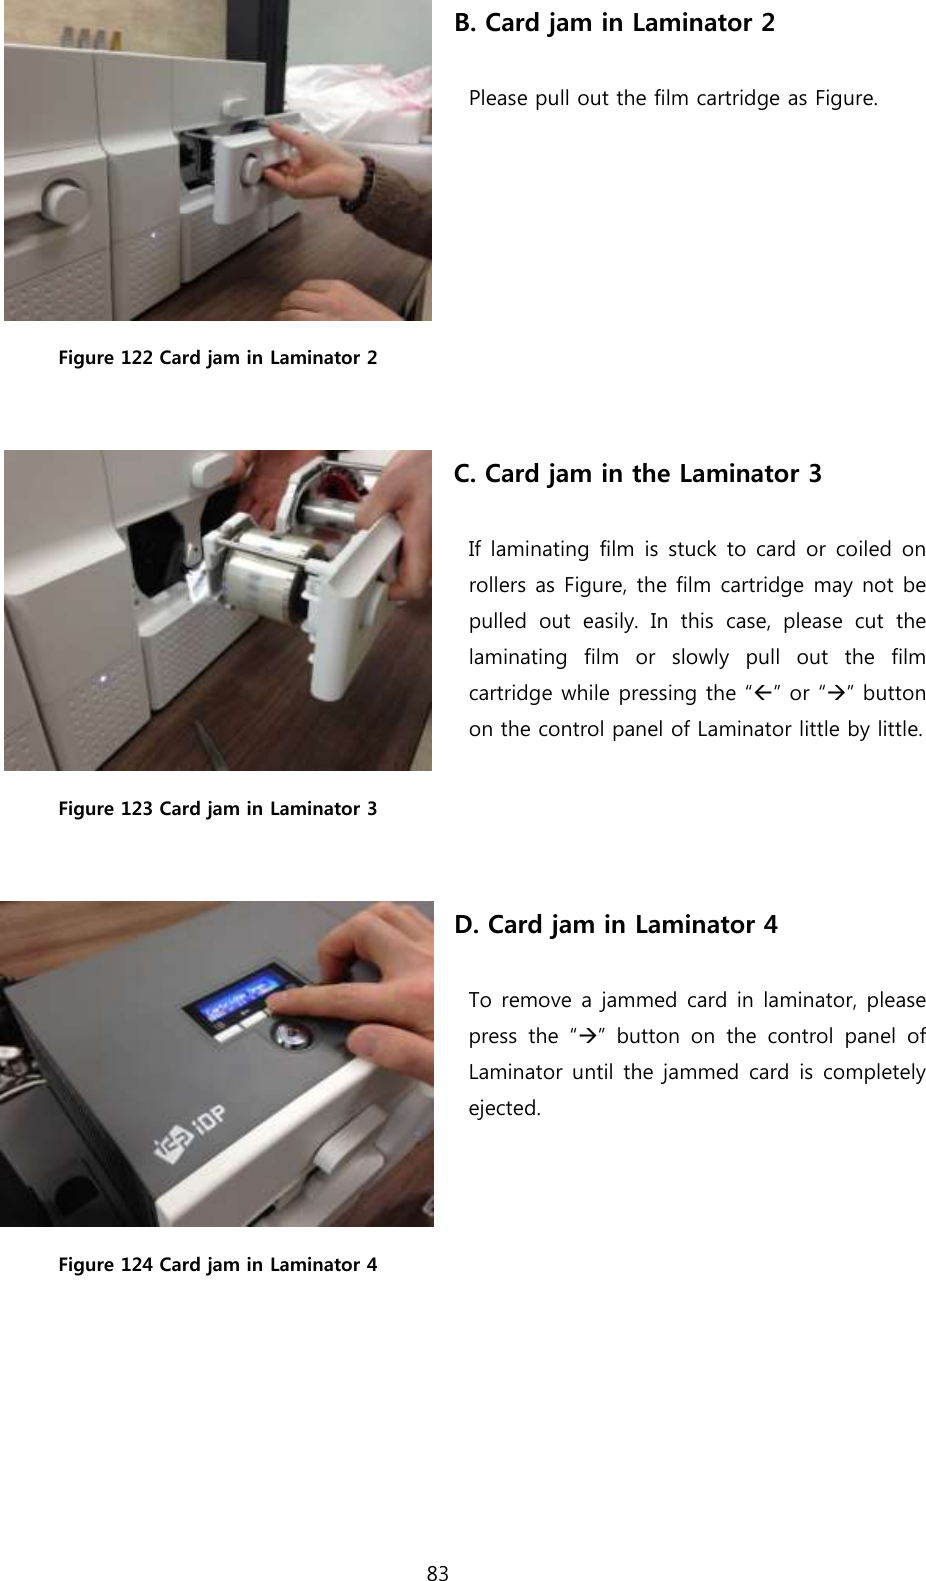 83   Figure 122 Card jam in Laminator 2 B. Card jam in Laminator 2  Please pull out the film cartridge as Figure.   Figure 123 Card jam in Laminator 3 C. Card jam in the Laminator 3  If laminating film is stuck to card or coiled on rollers as Figure, the film cartridge may not be pulled  out  easily.  In  this  case,  please  cut  the laminating  film  or  slowly  pull  out  the  film cartridge while pressing the “” or “” button on the control panel of Laminator little by little.   Figure 124 Card jam in Laminator 4 D. Card jam in Laminator 4  To remove a jammed card in laminator, please press  the  “”  button  on  the  control  panel  of Laminator until the jammed card is completely ejected.  